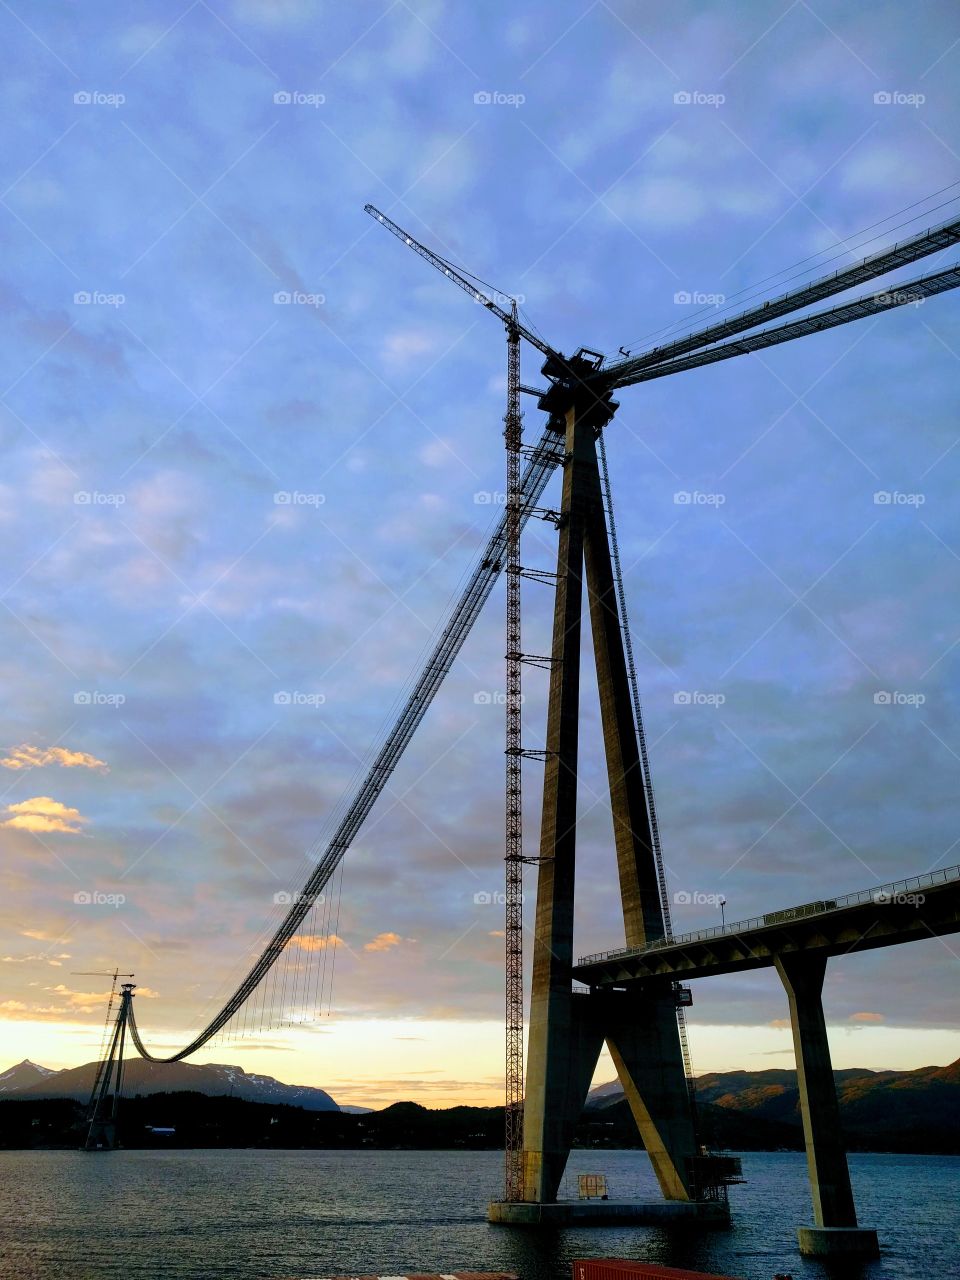 the halogaland bridge under construction in 2018. the decking was not yet hinged onto the cables.